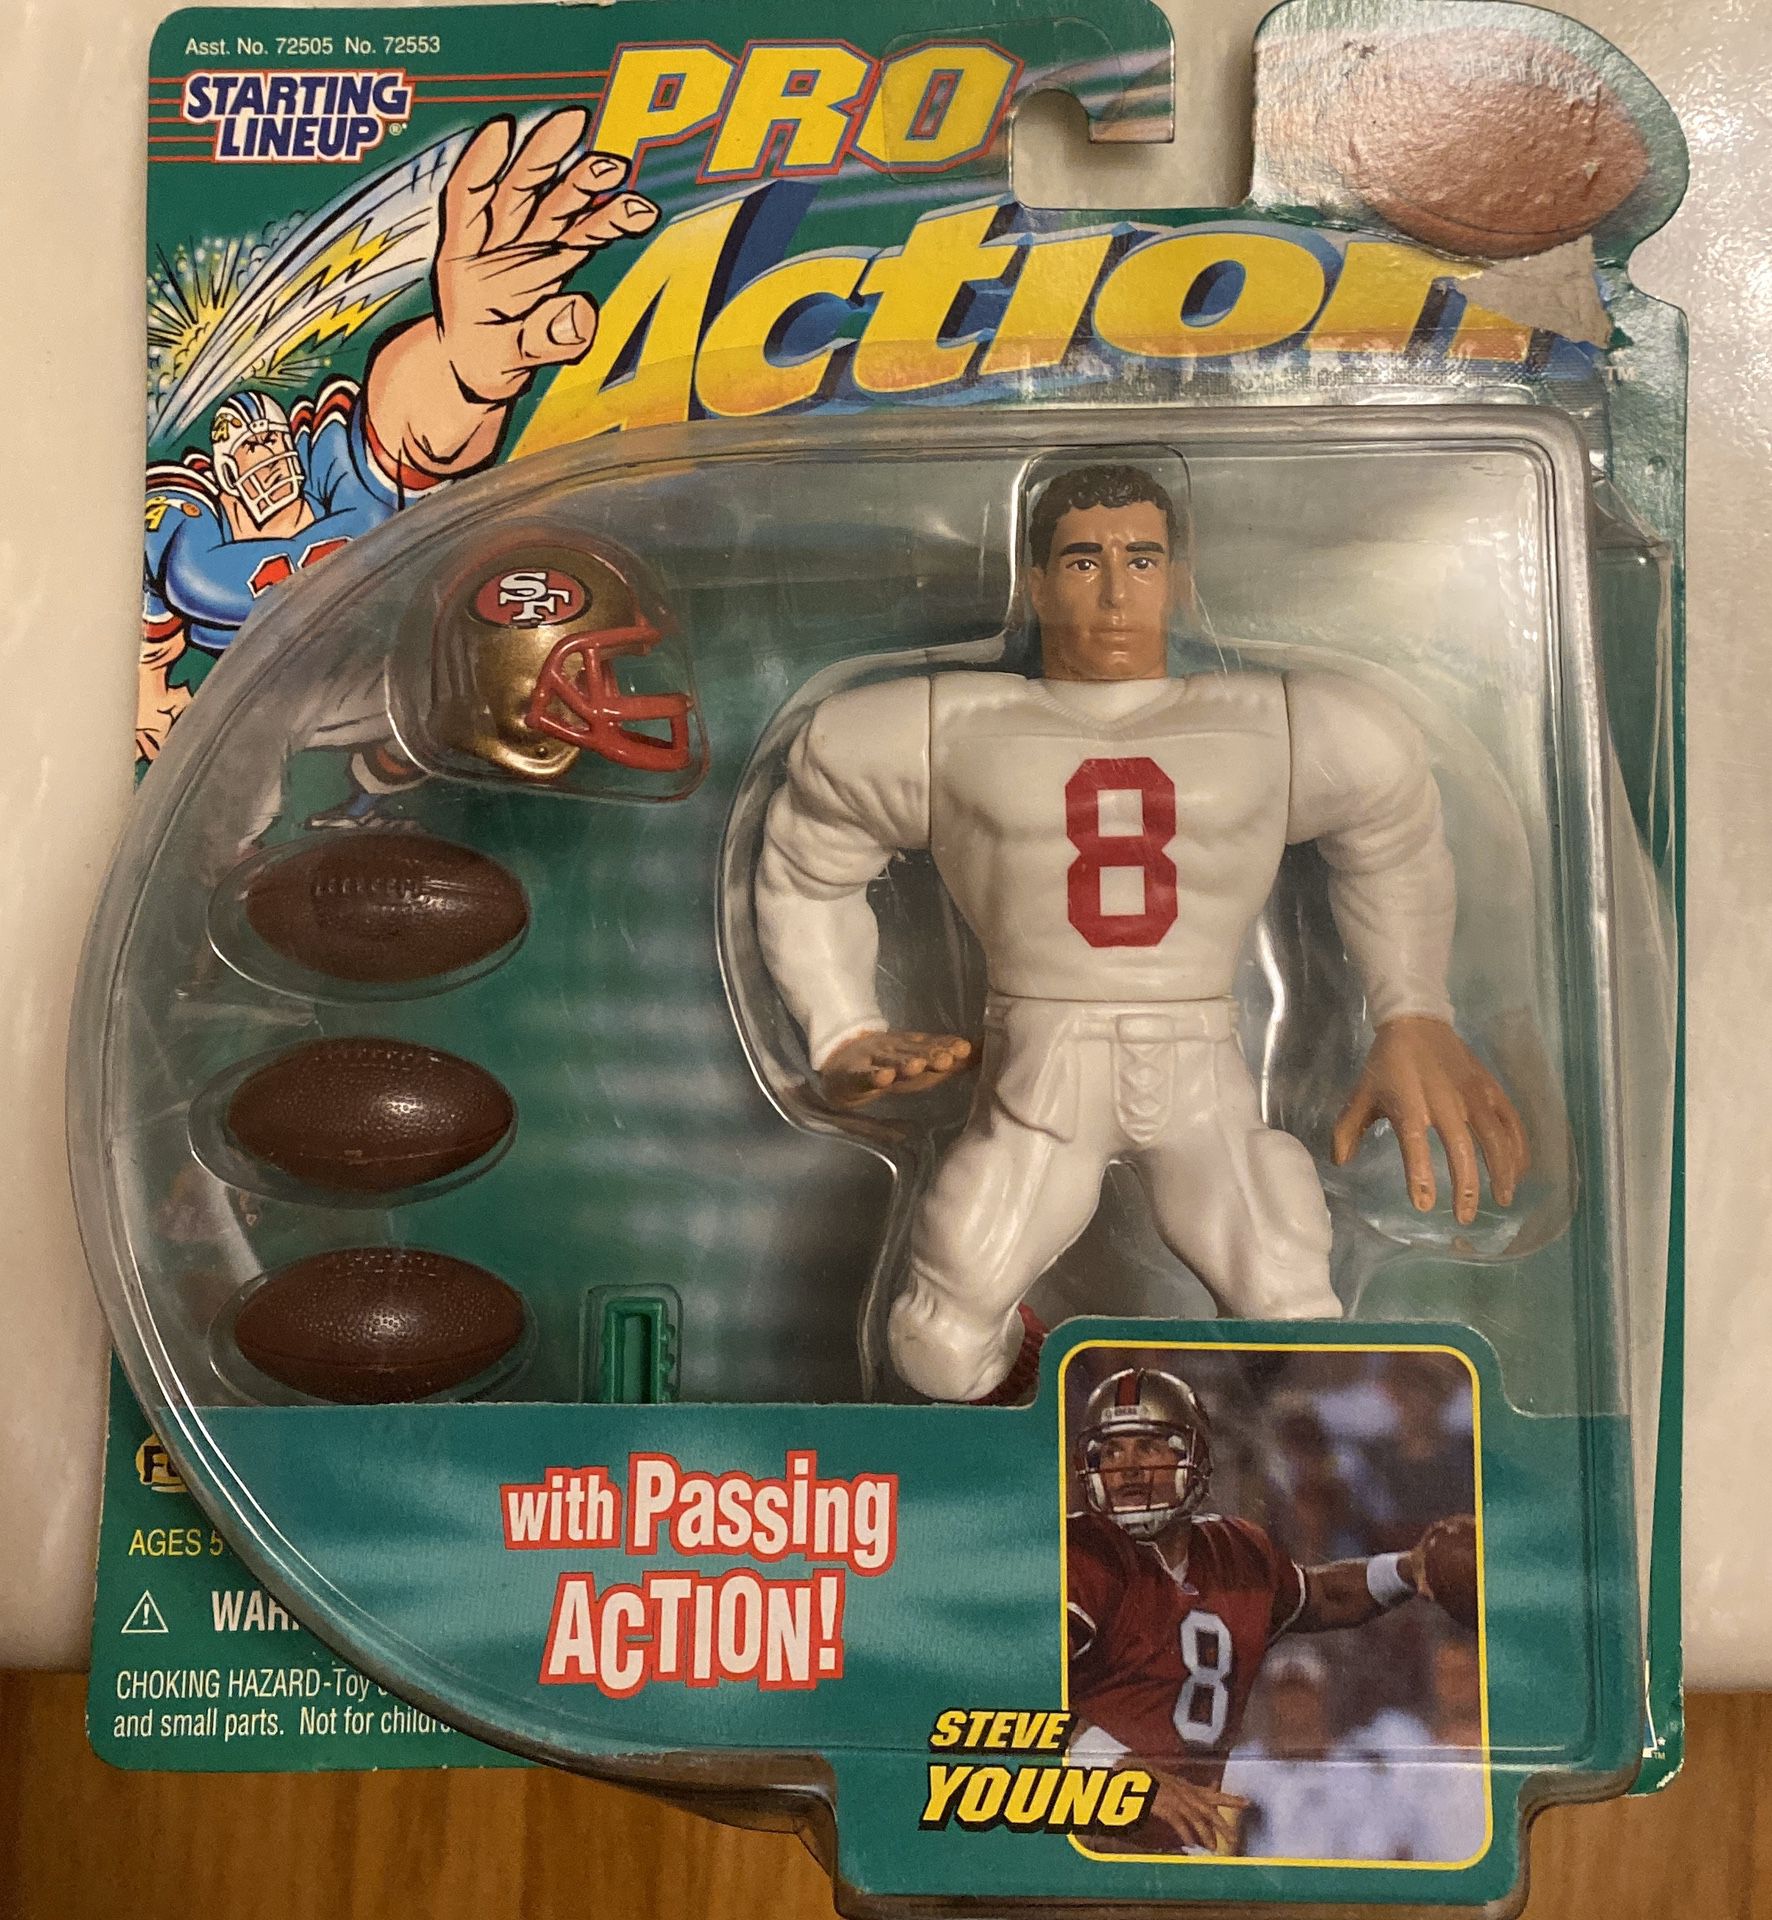 Steve Young SF 49ers 1999 collectible toy